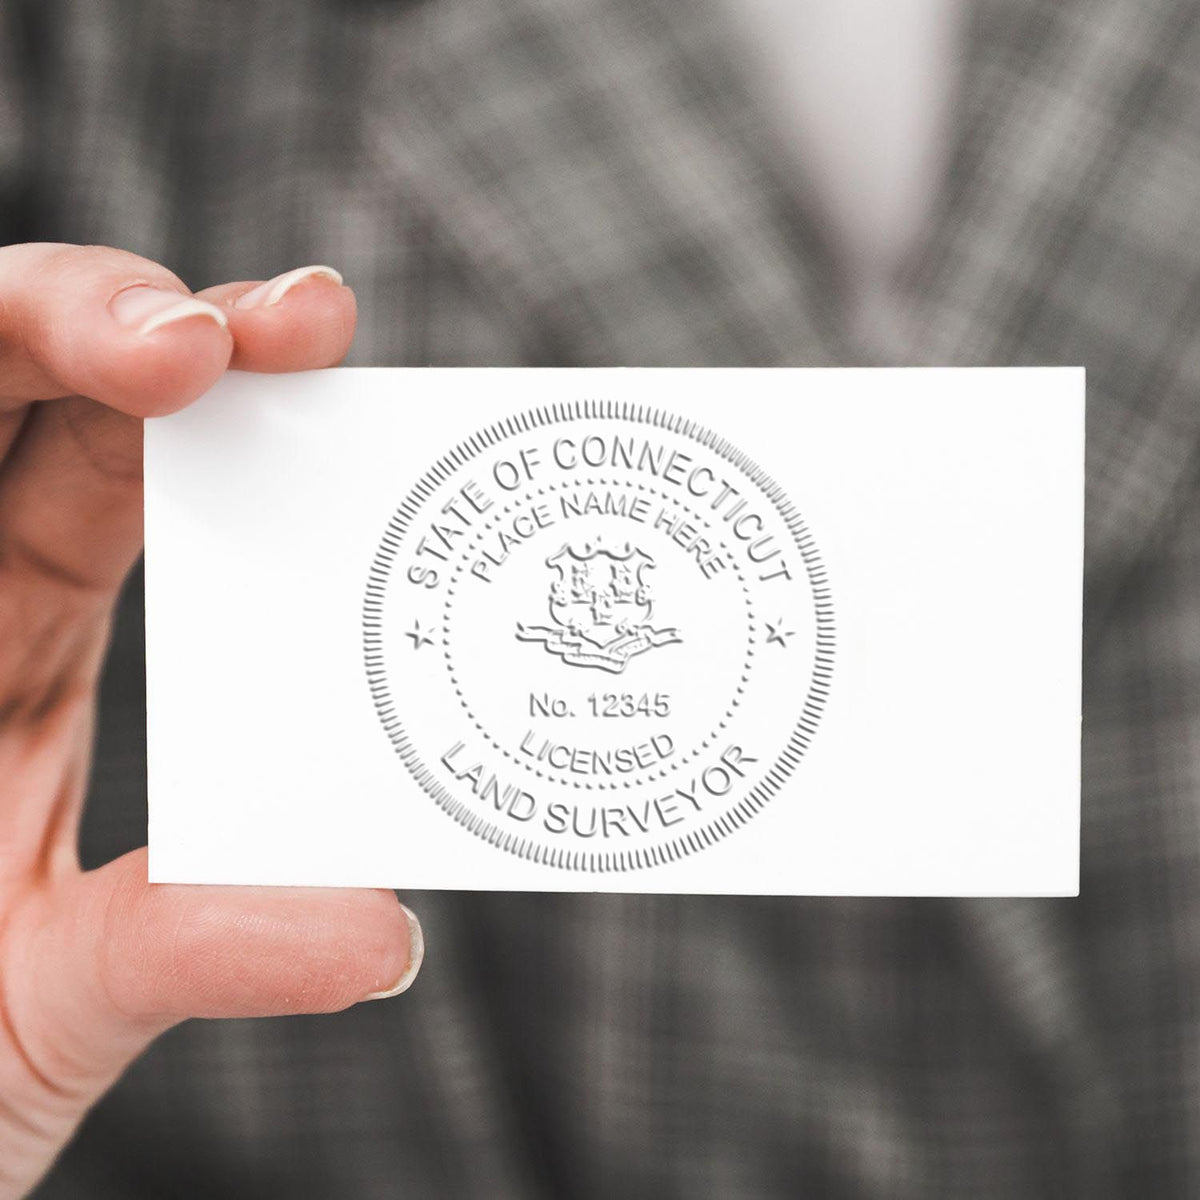 Another Example of a stamped impression of the State of Connecticut Soft Land Surveyor Embossing Seal on a piece of office paper.